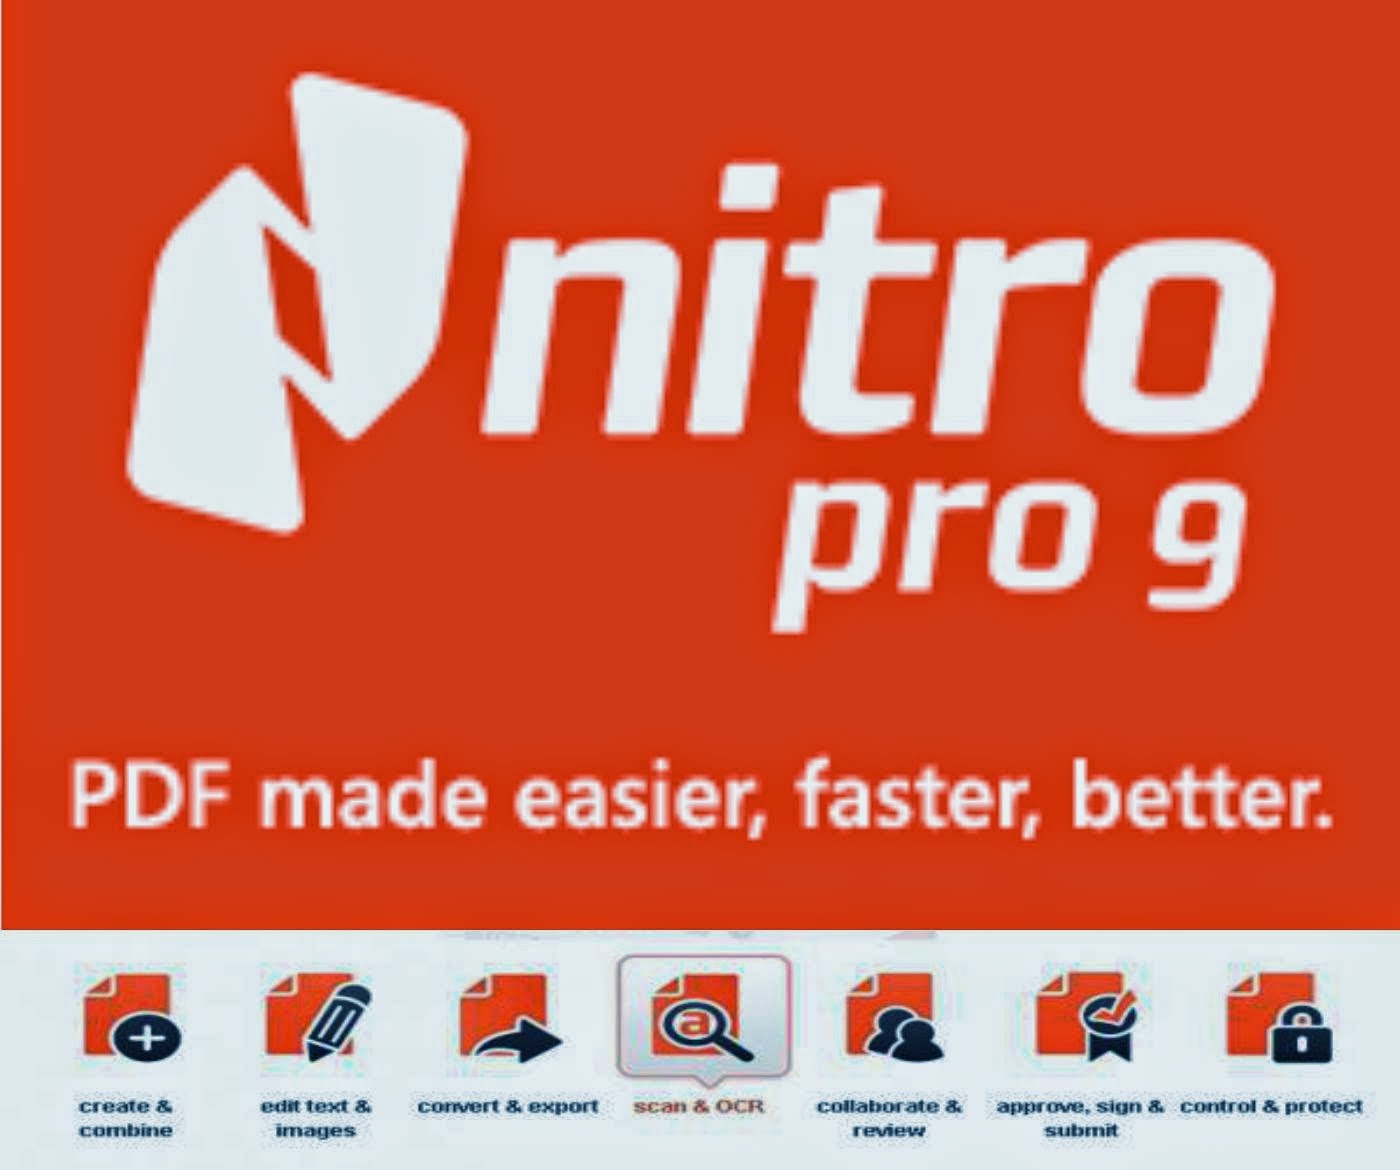 nitro pdf professional for android